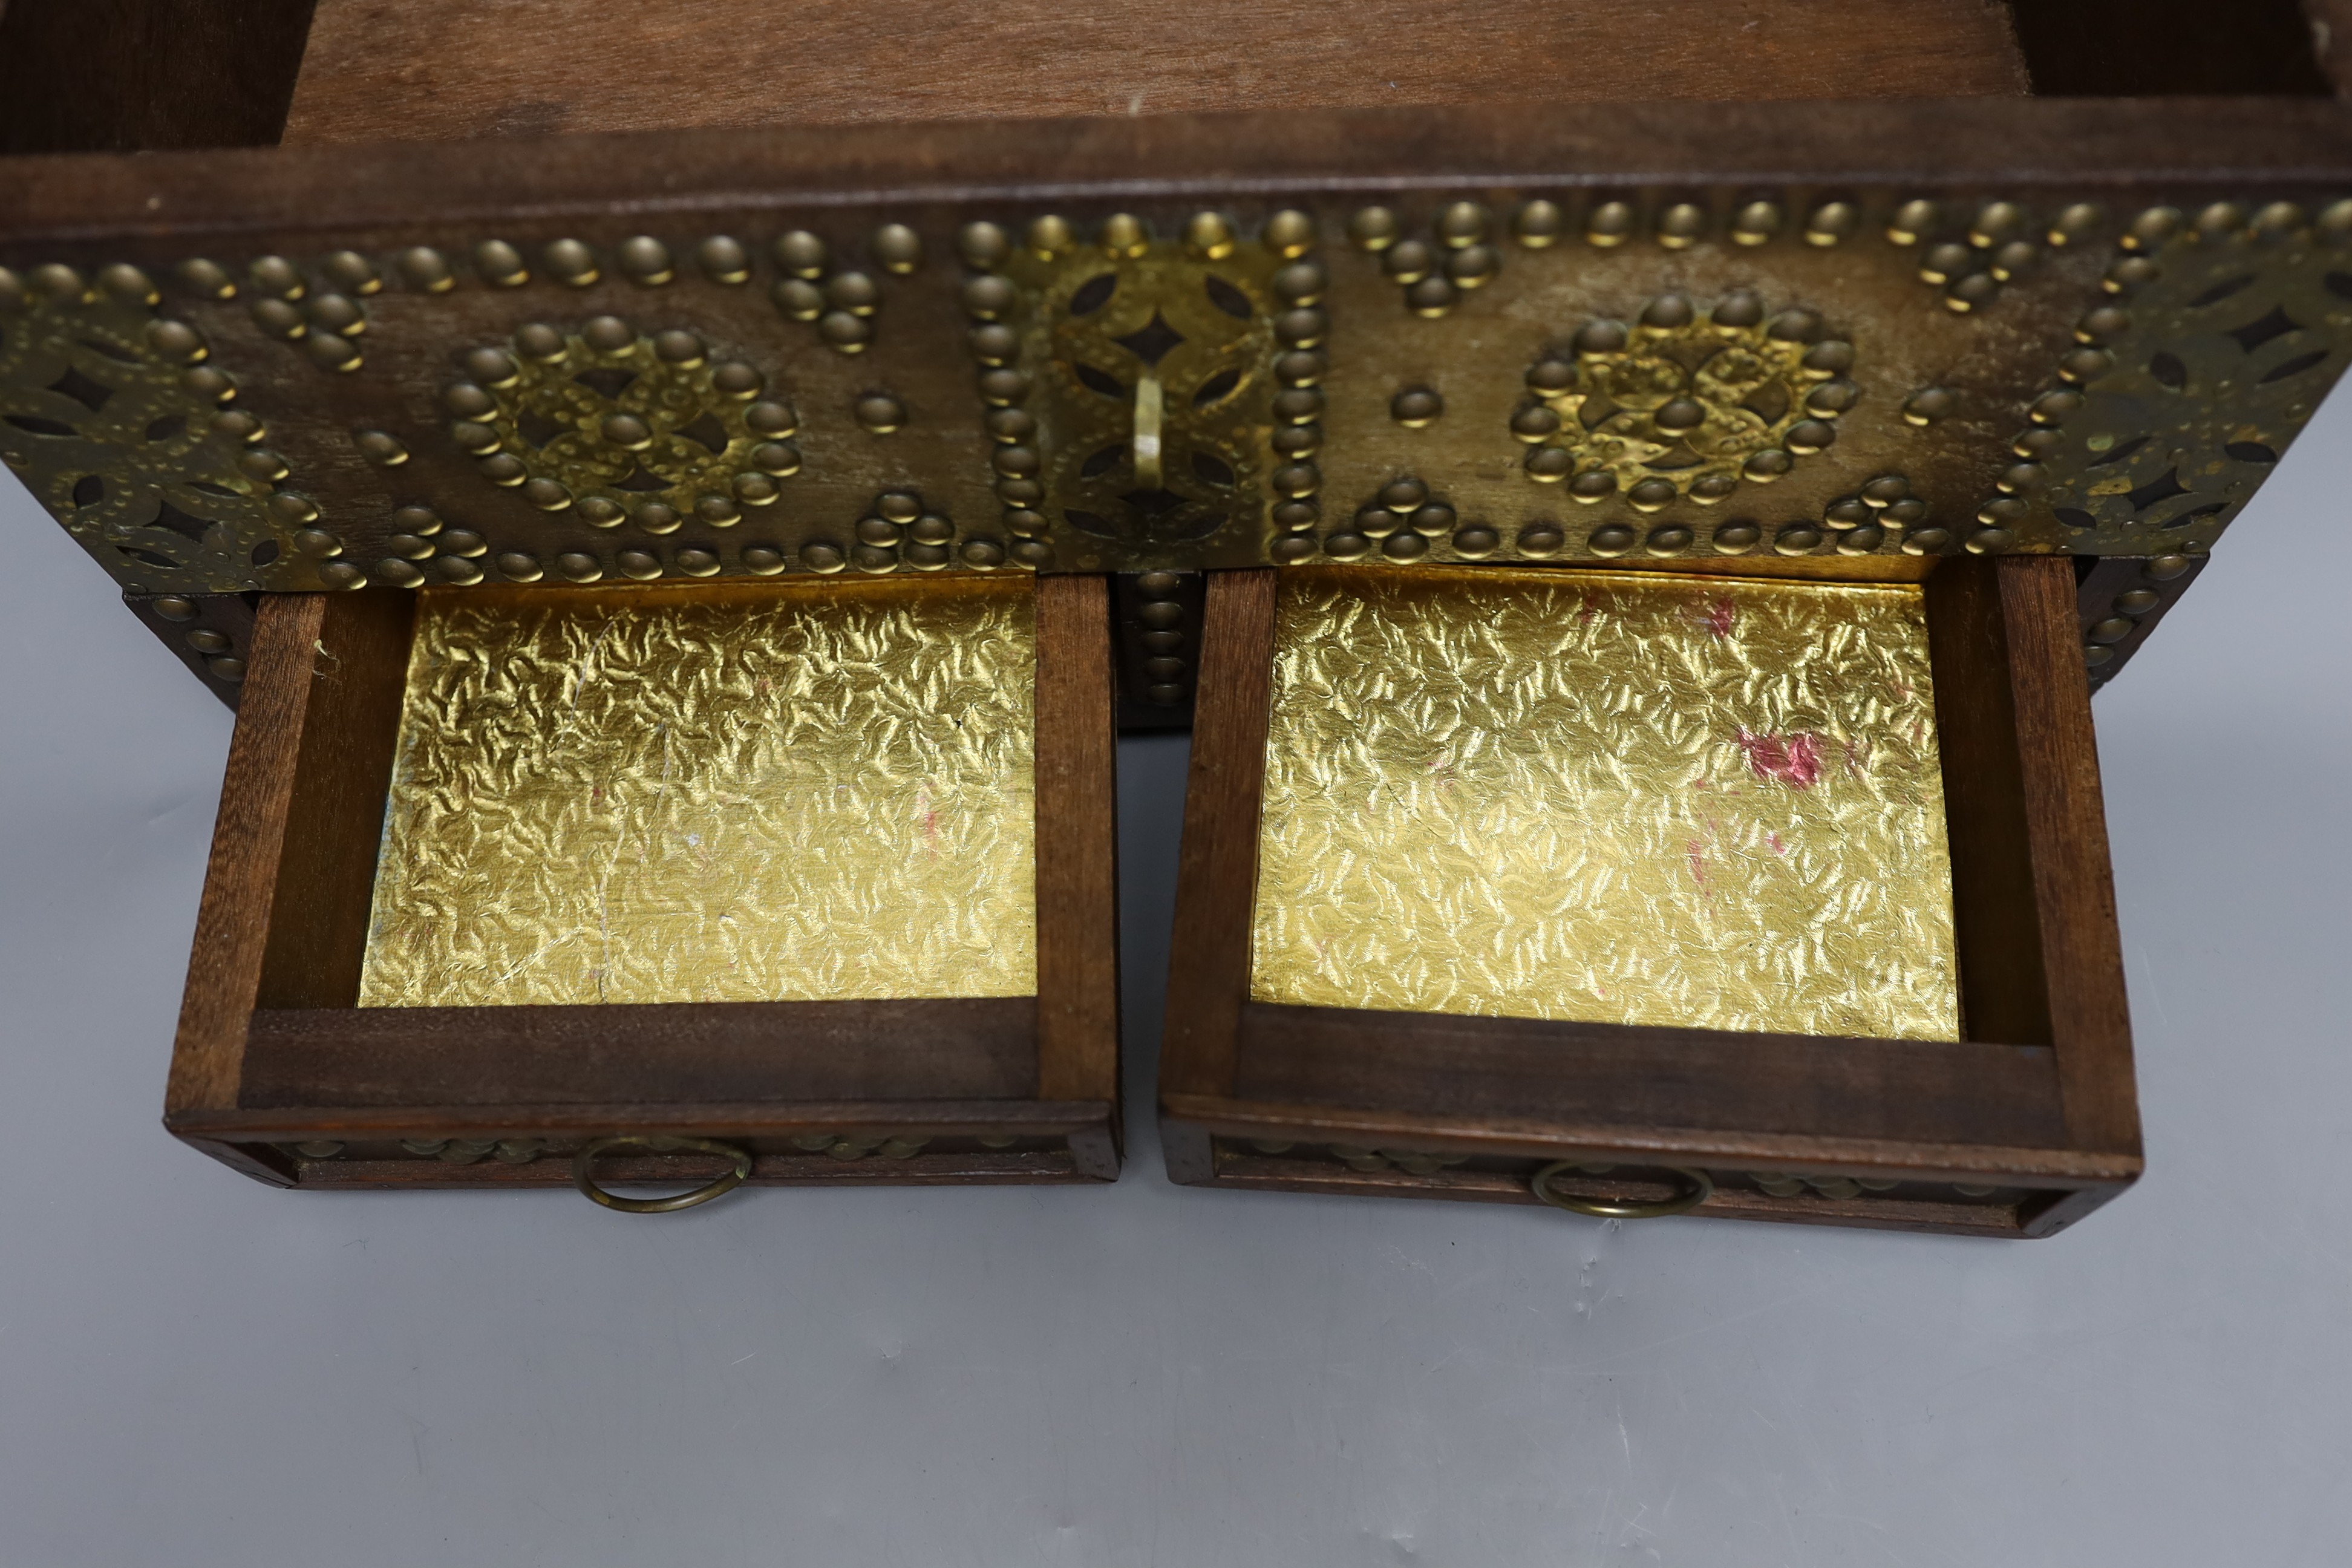 An Indian brass studded and mounted box, 45cms wide x 21cms high